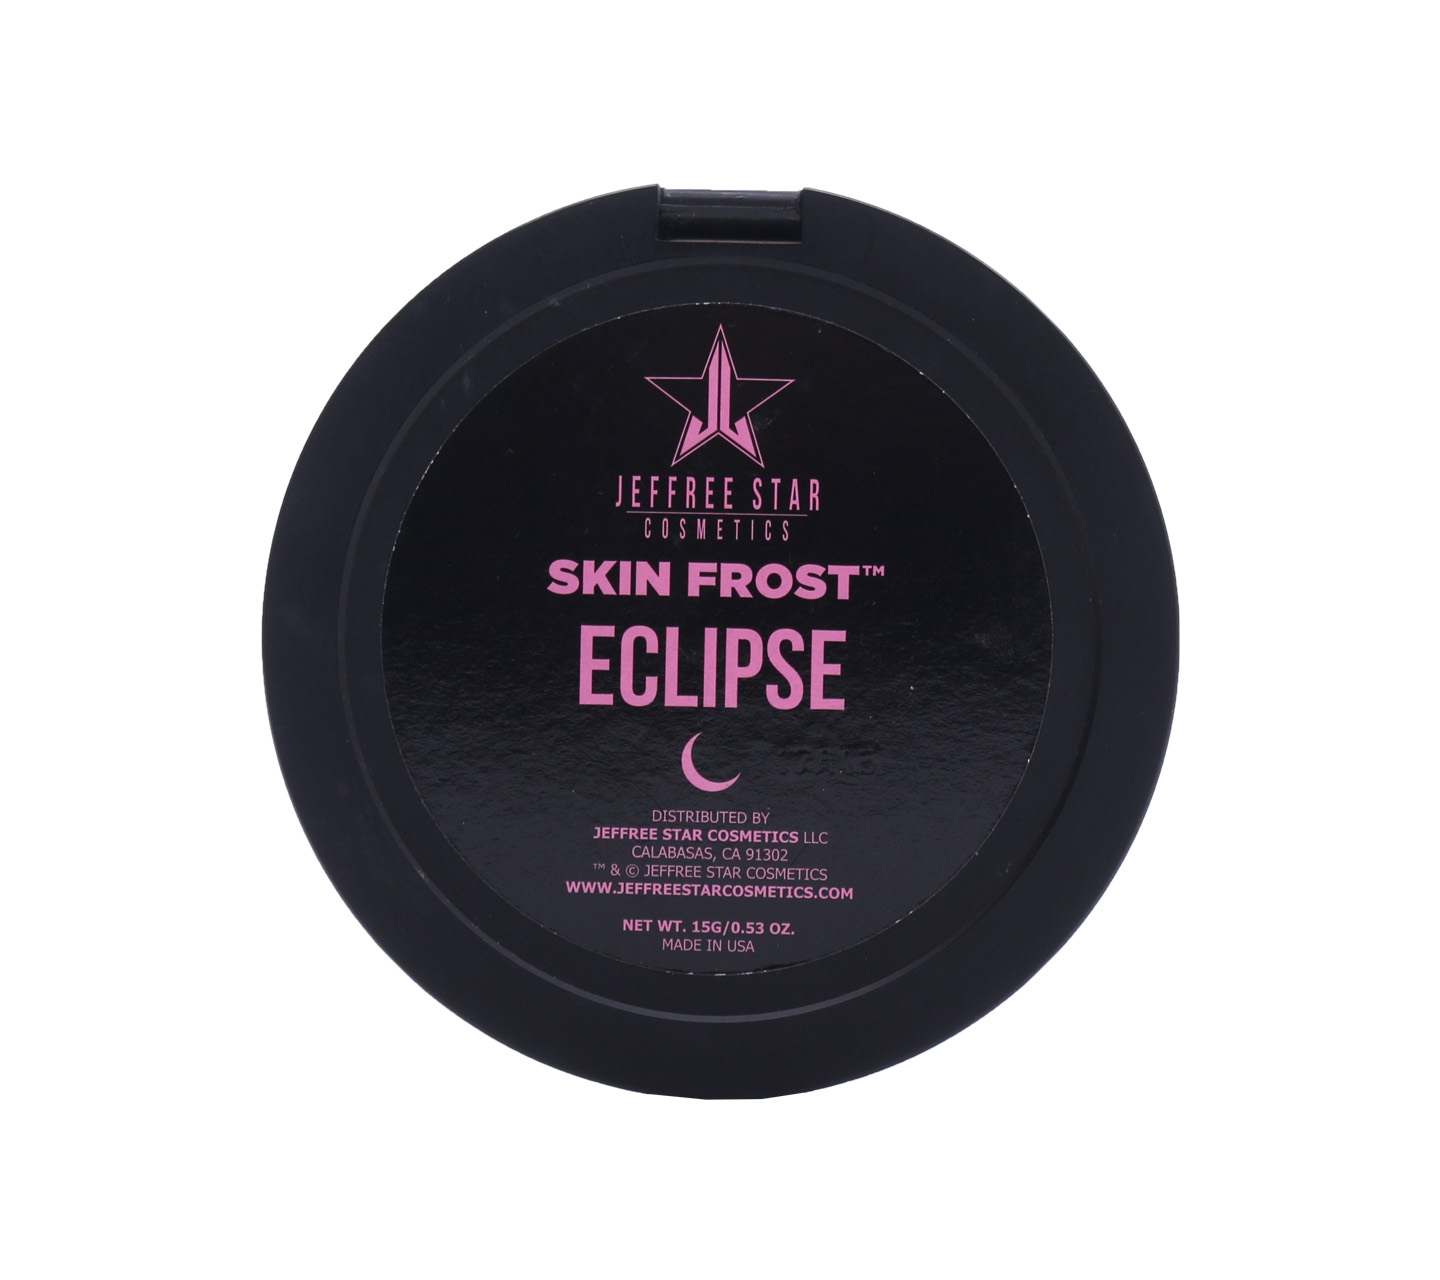 Jeffree Star Cosmetics Skin Frost Eclipse Faces